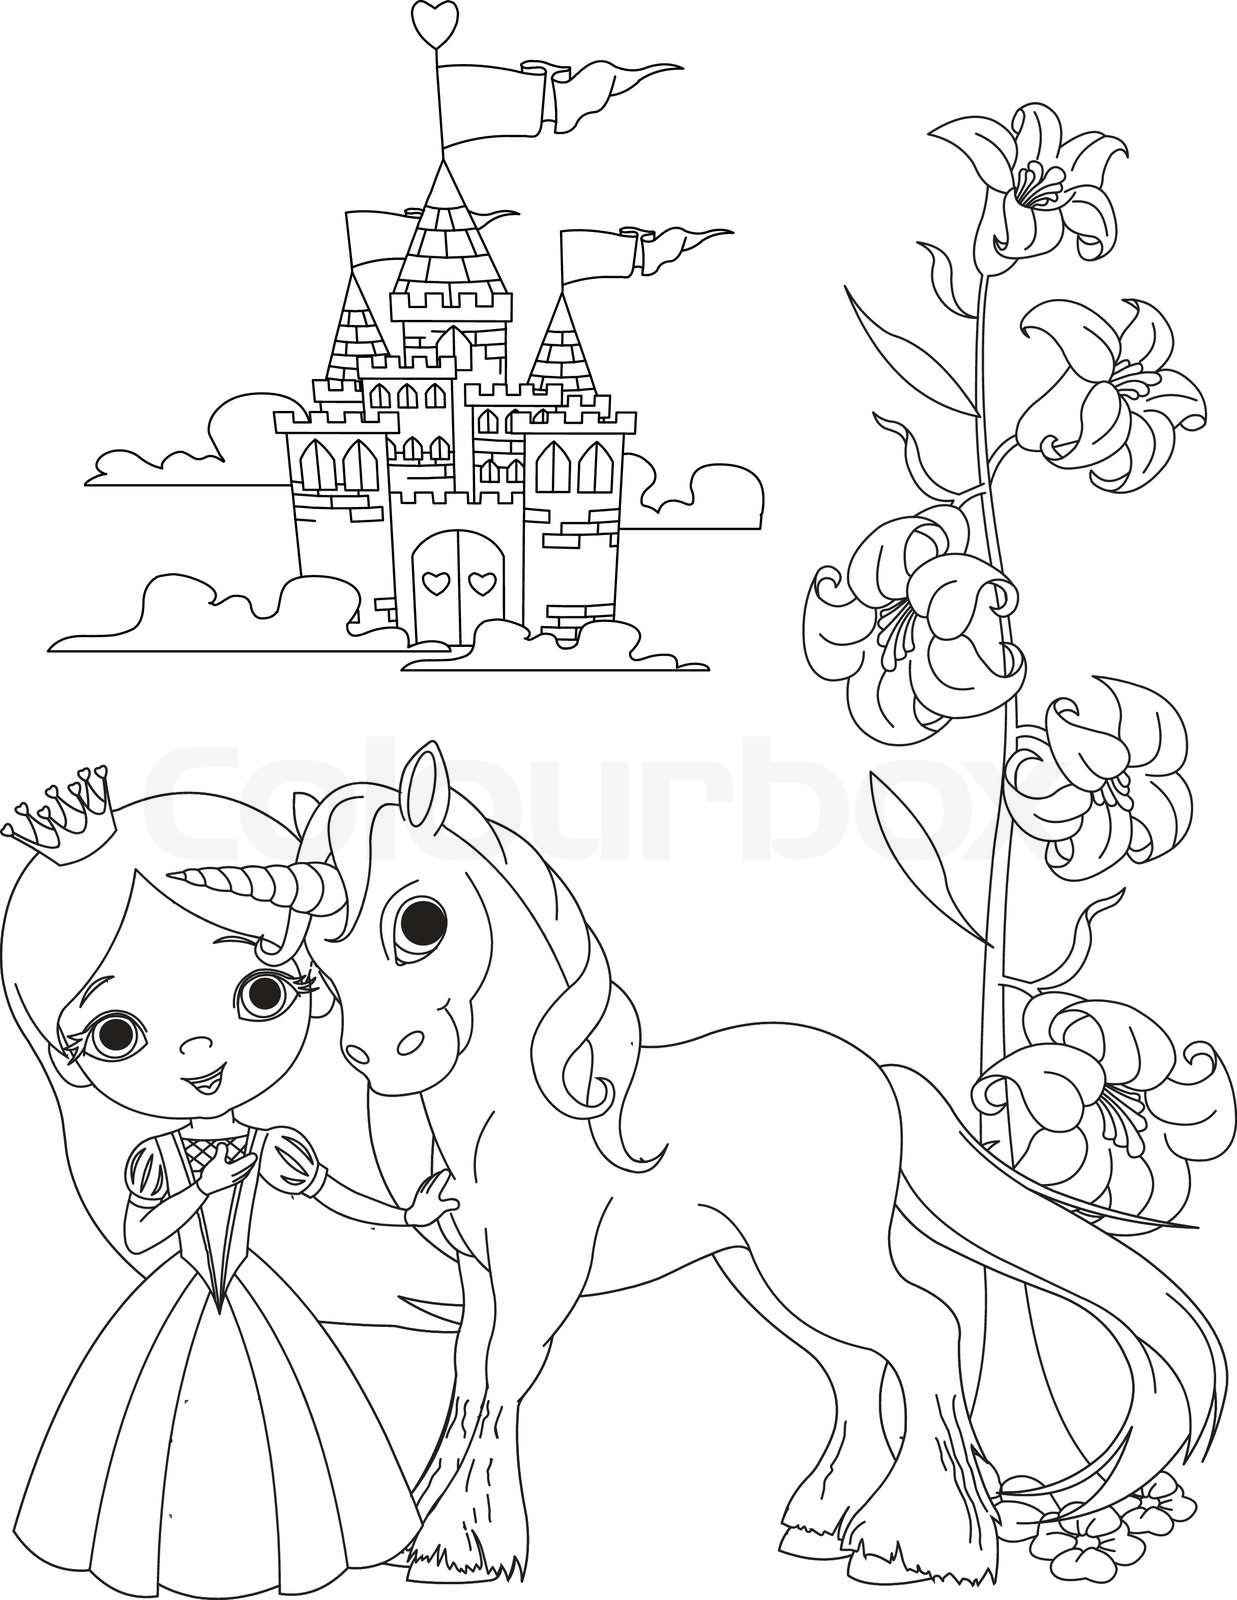 The Beautiful princess and her cute unicorn coloring page | Stock vector |  Colourbox